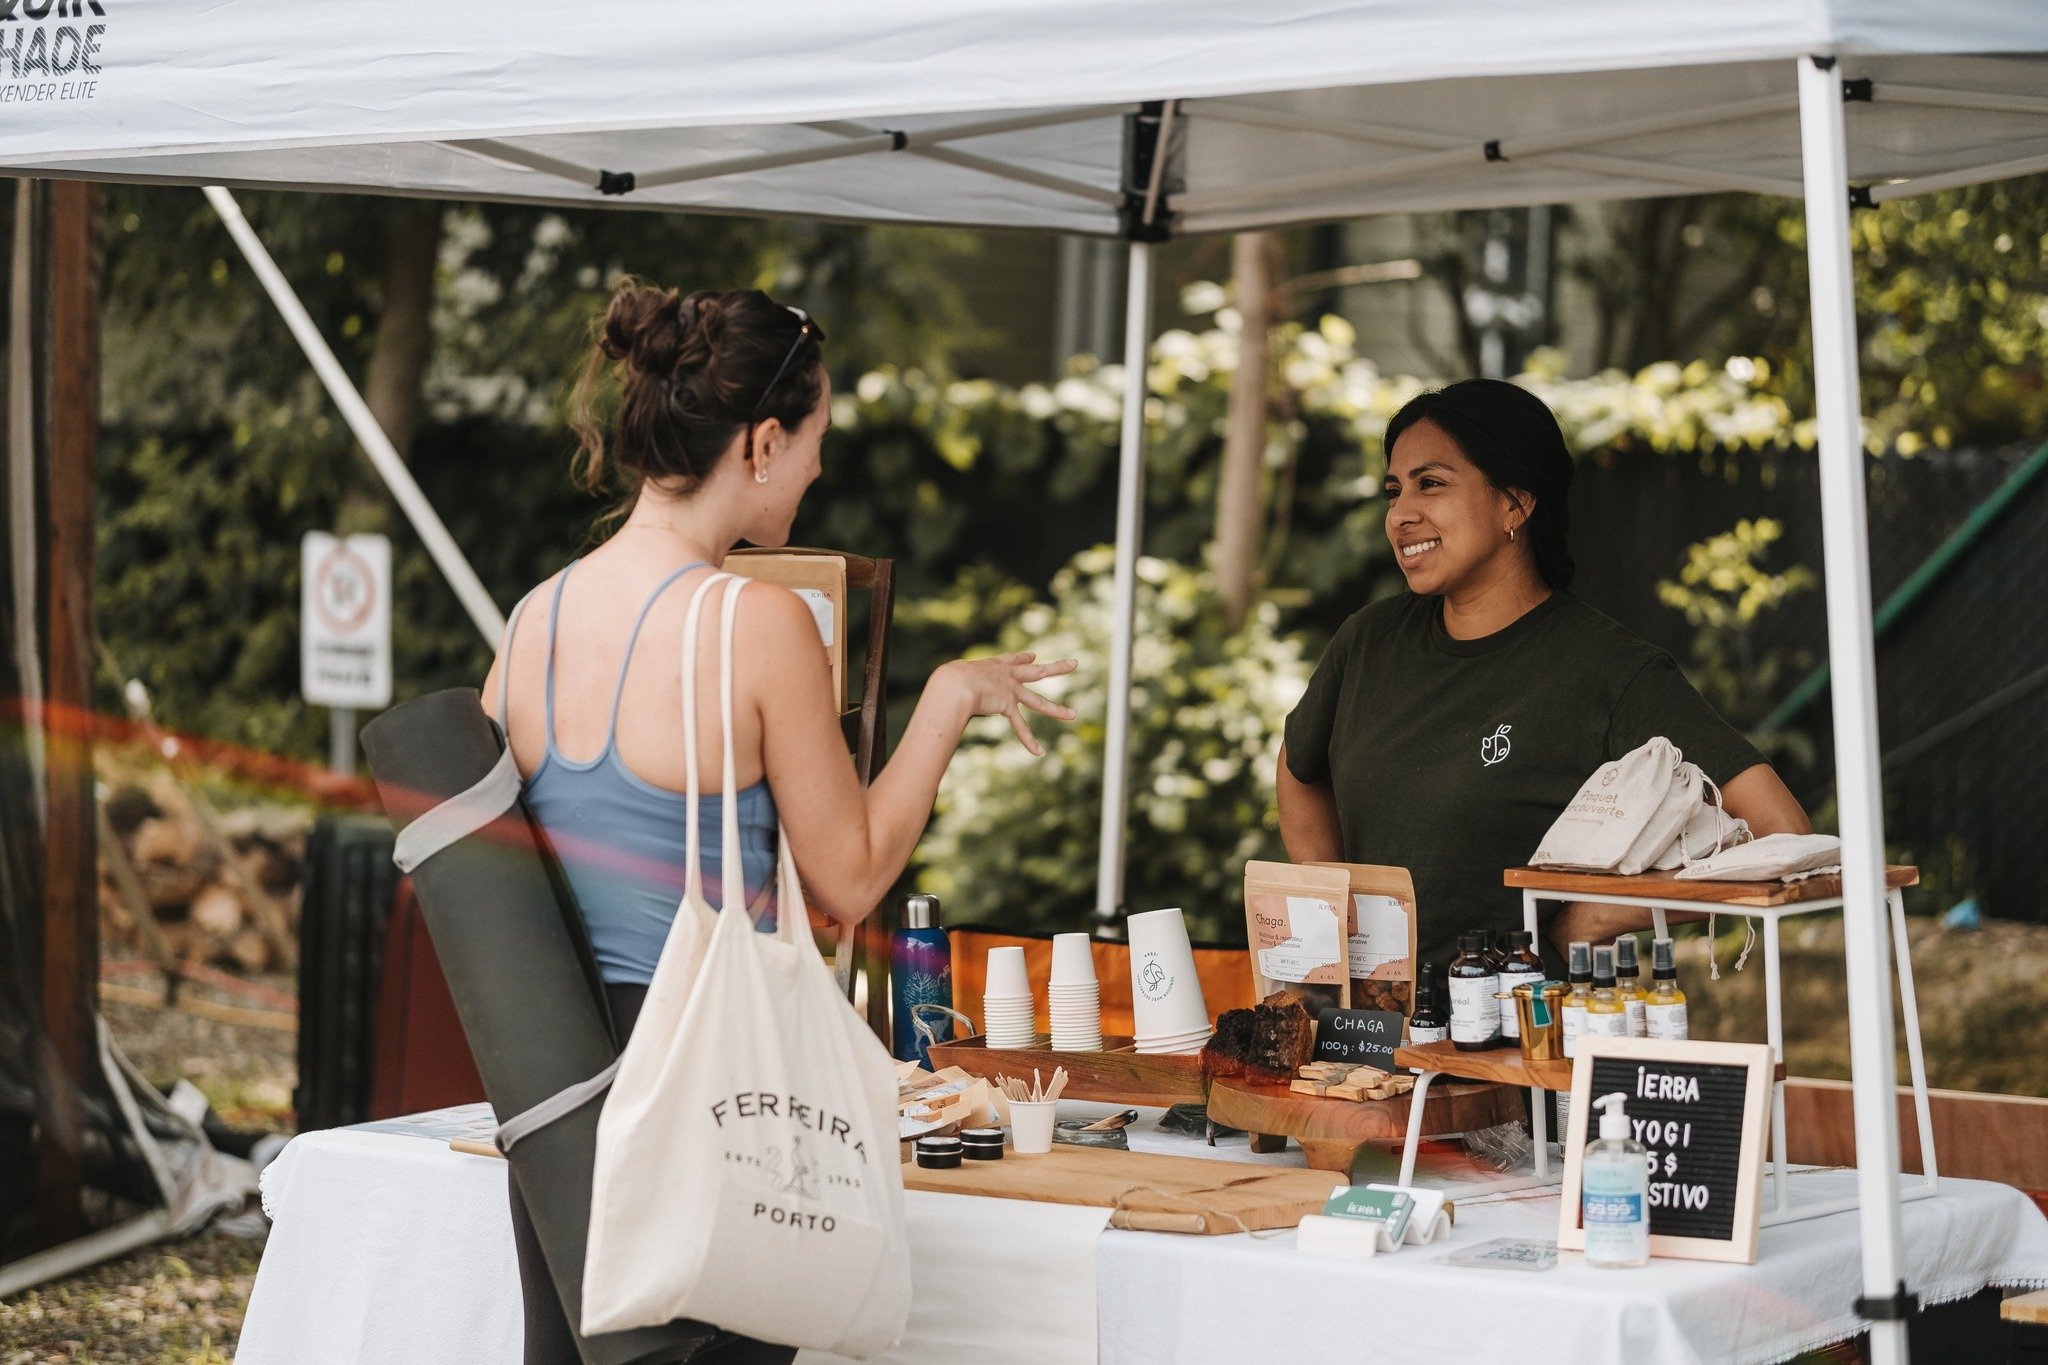 Seize the opportunity to become an exhibitor and connect with our community at this year&rsquo;s Illume Festival! Our street fair event will be held in the heart of Hudson on July 13th and 14th, 2024.

Join us as an exhibitor, showcase your unique of